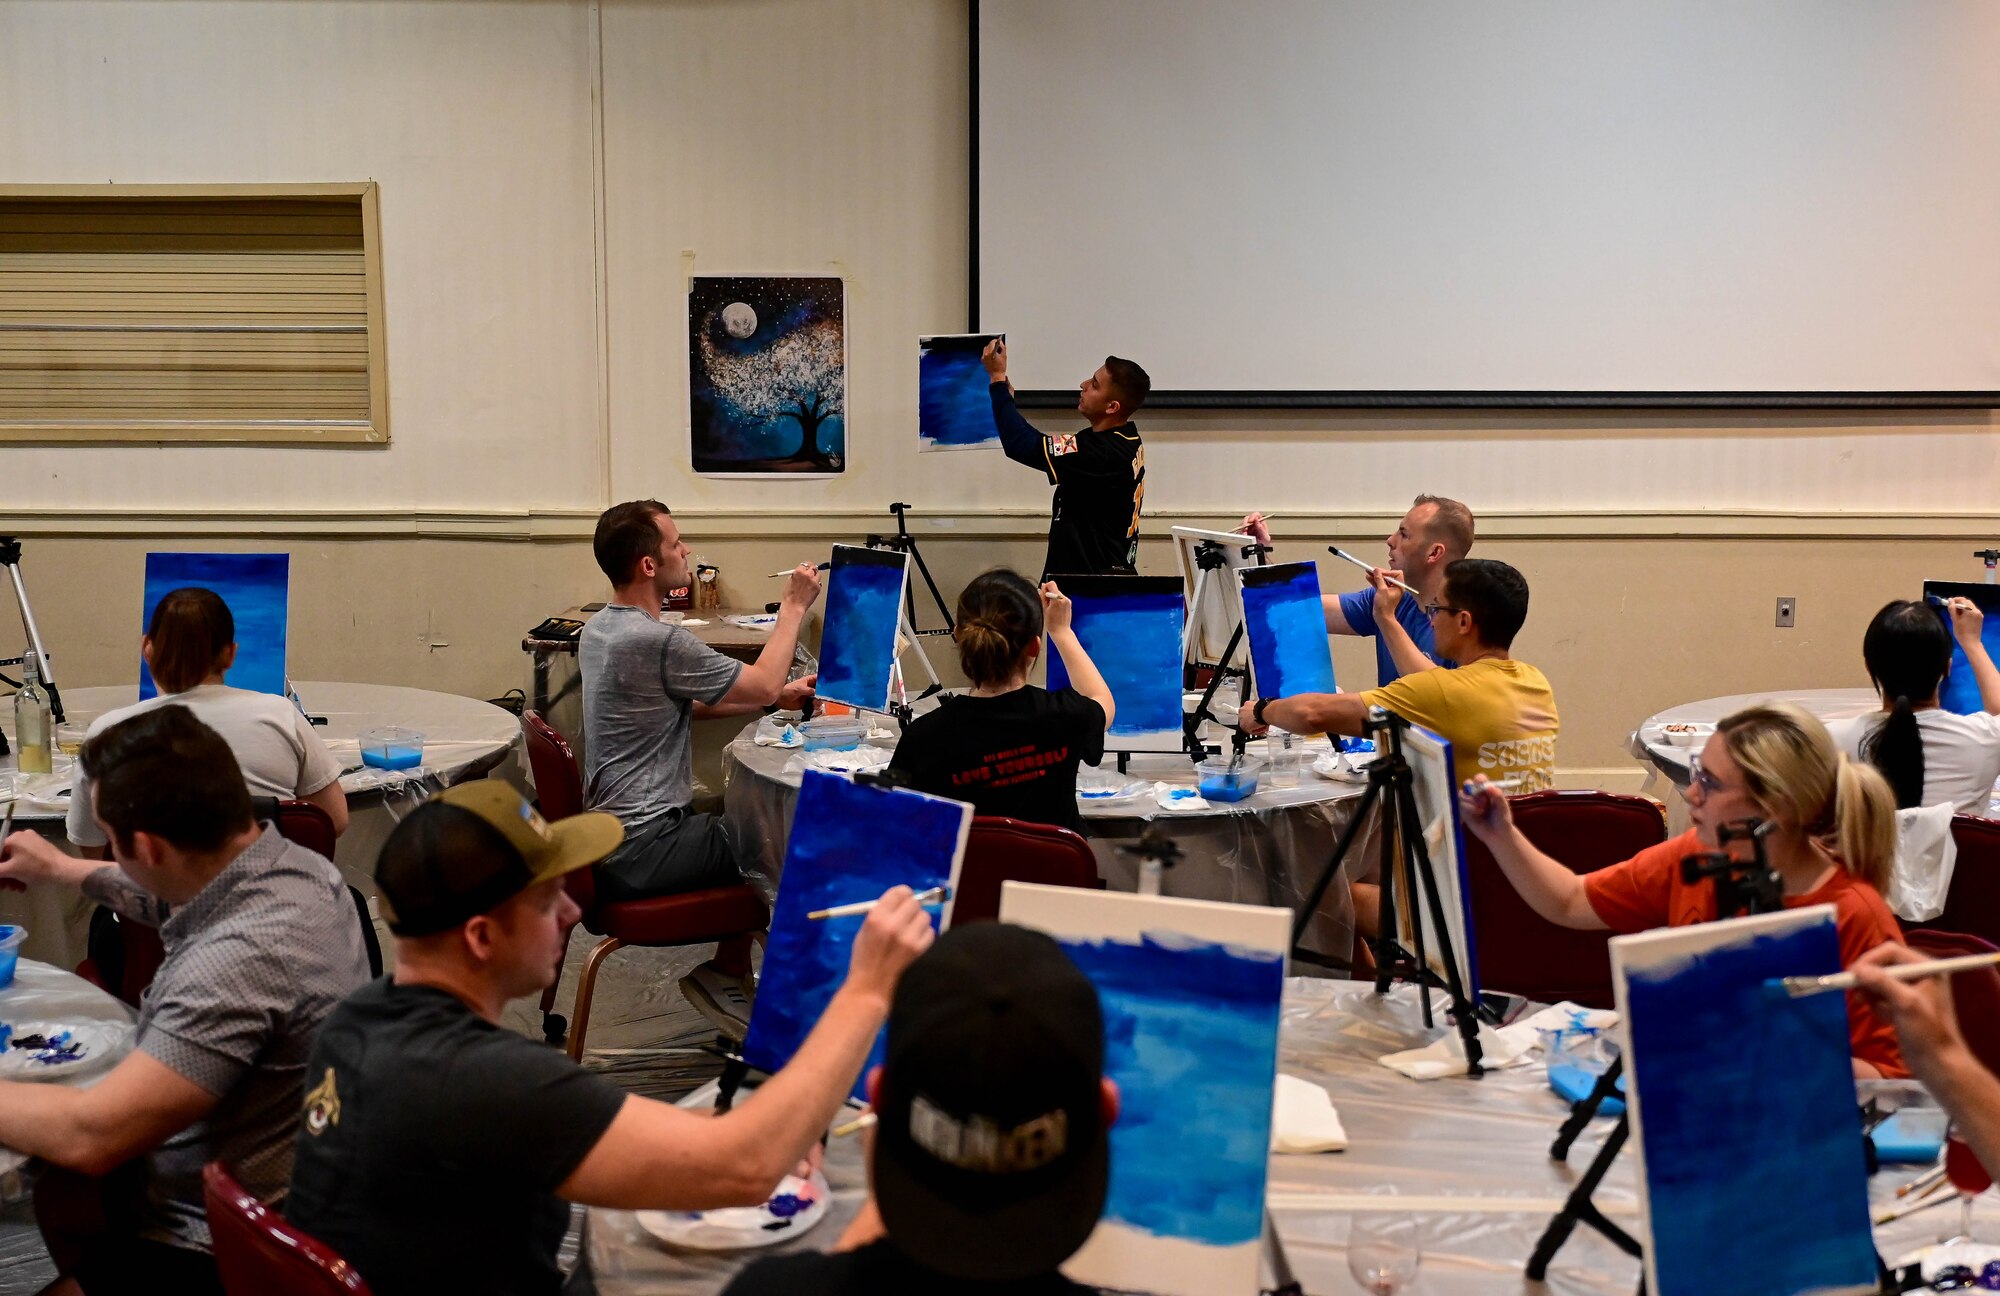 Students follow instructor guidance while painting.